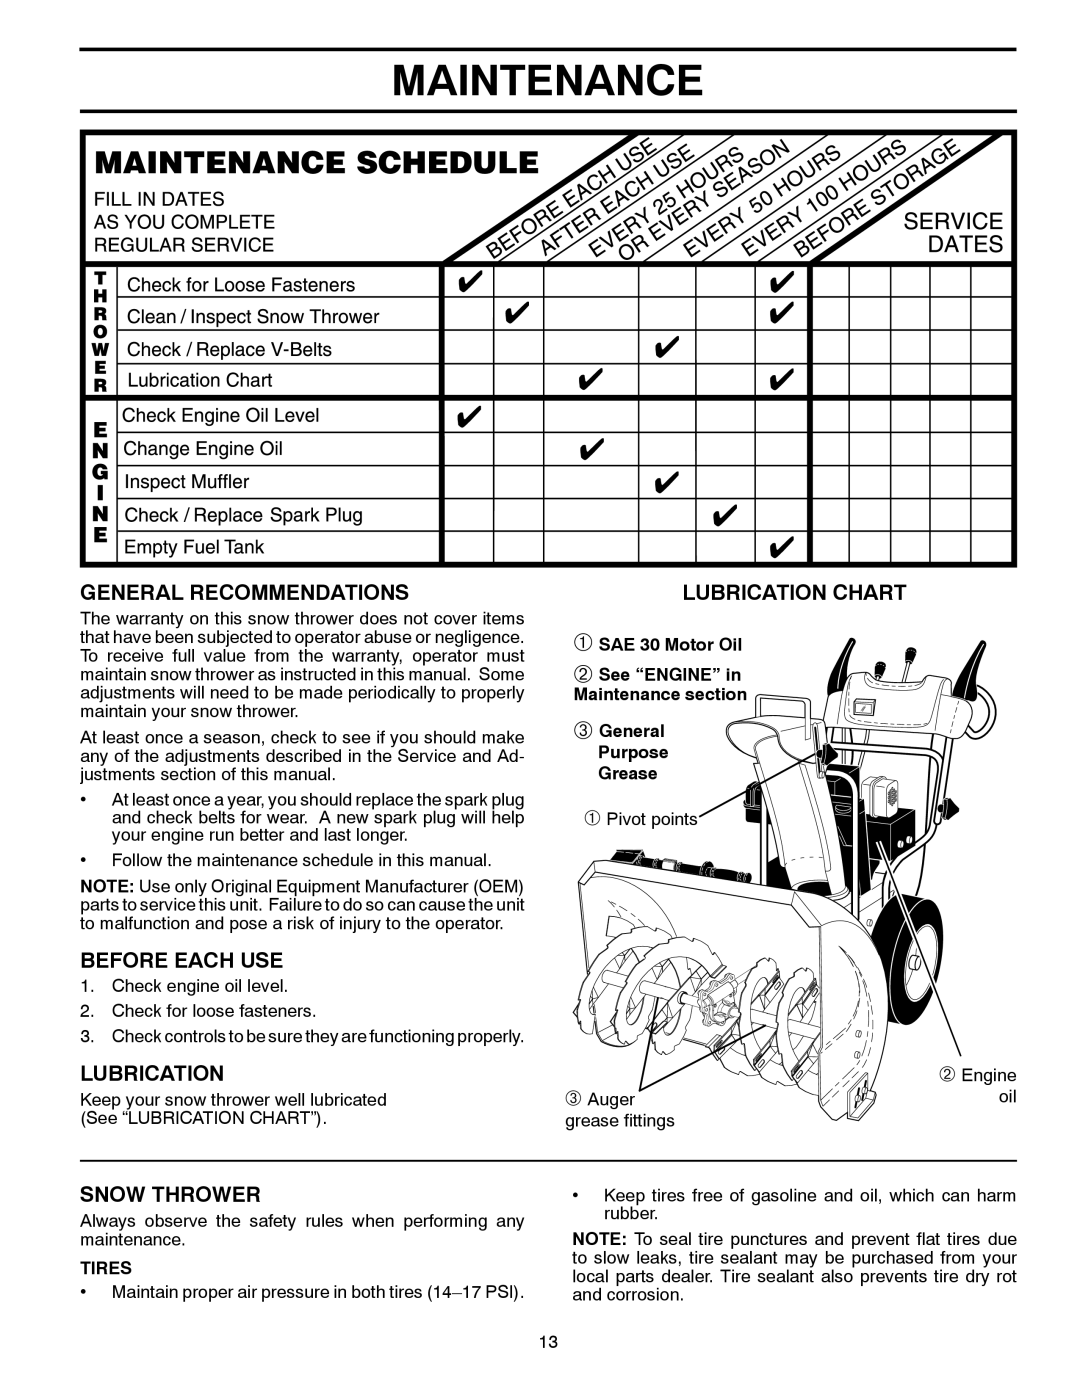 Poulan 96192003400 Maintenance, General Recommendations, Before Each Use, Snow Thrower, Lubrication Chart, Tires 